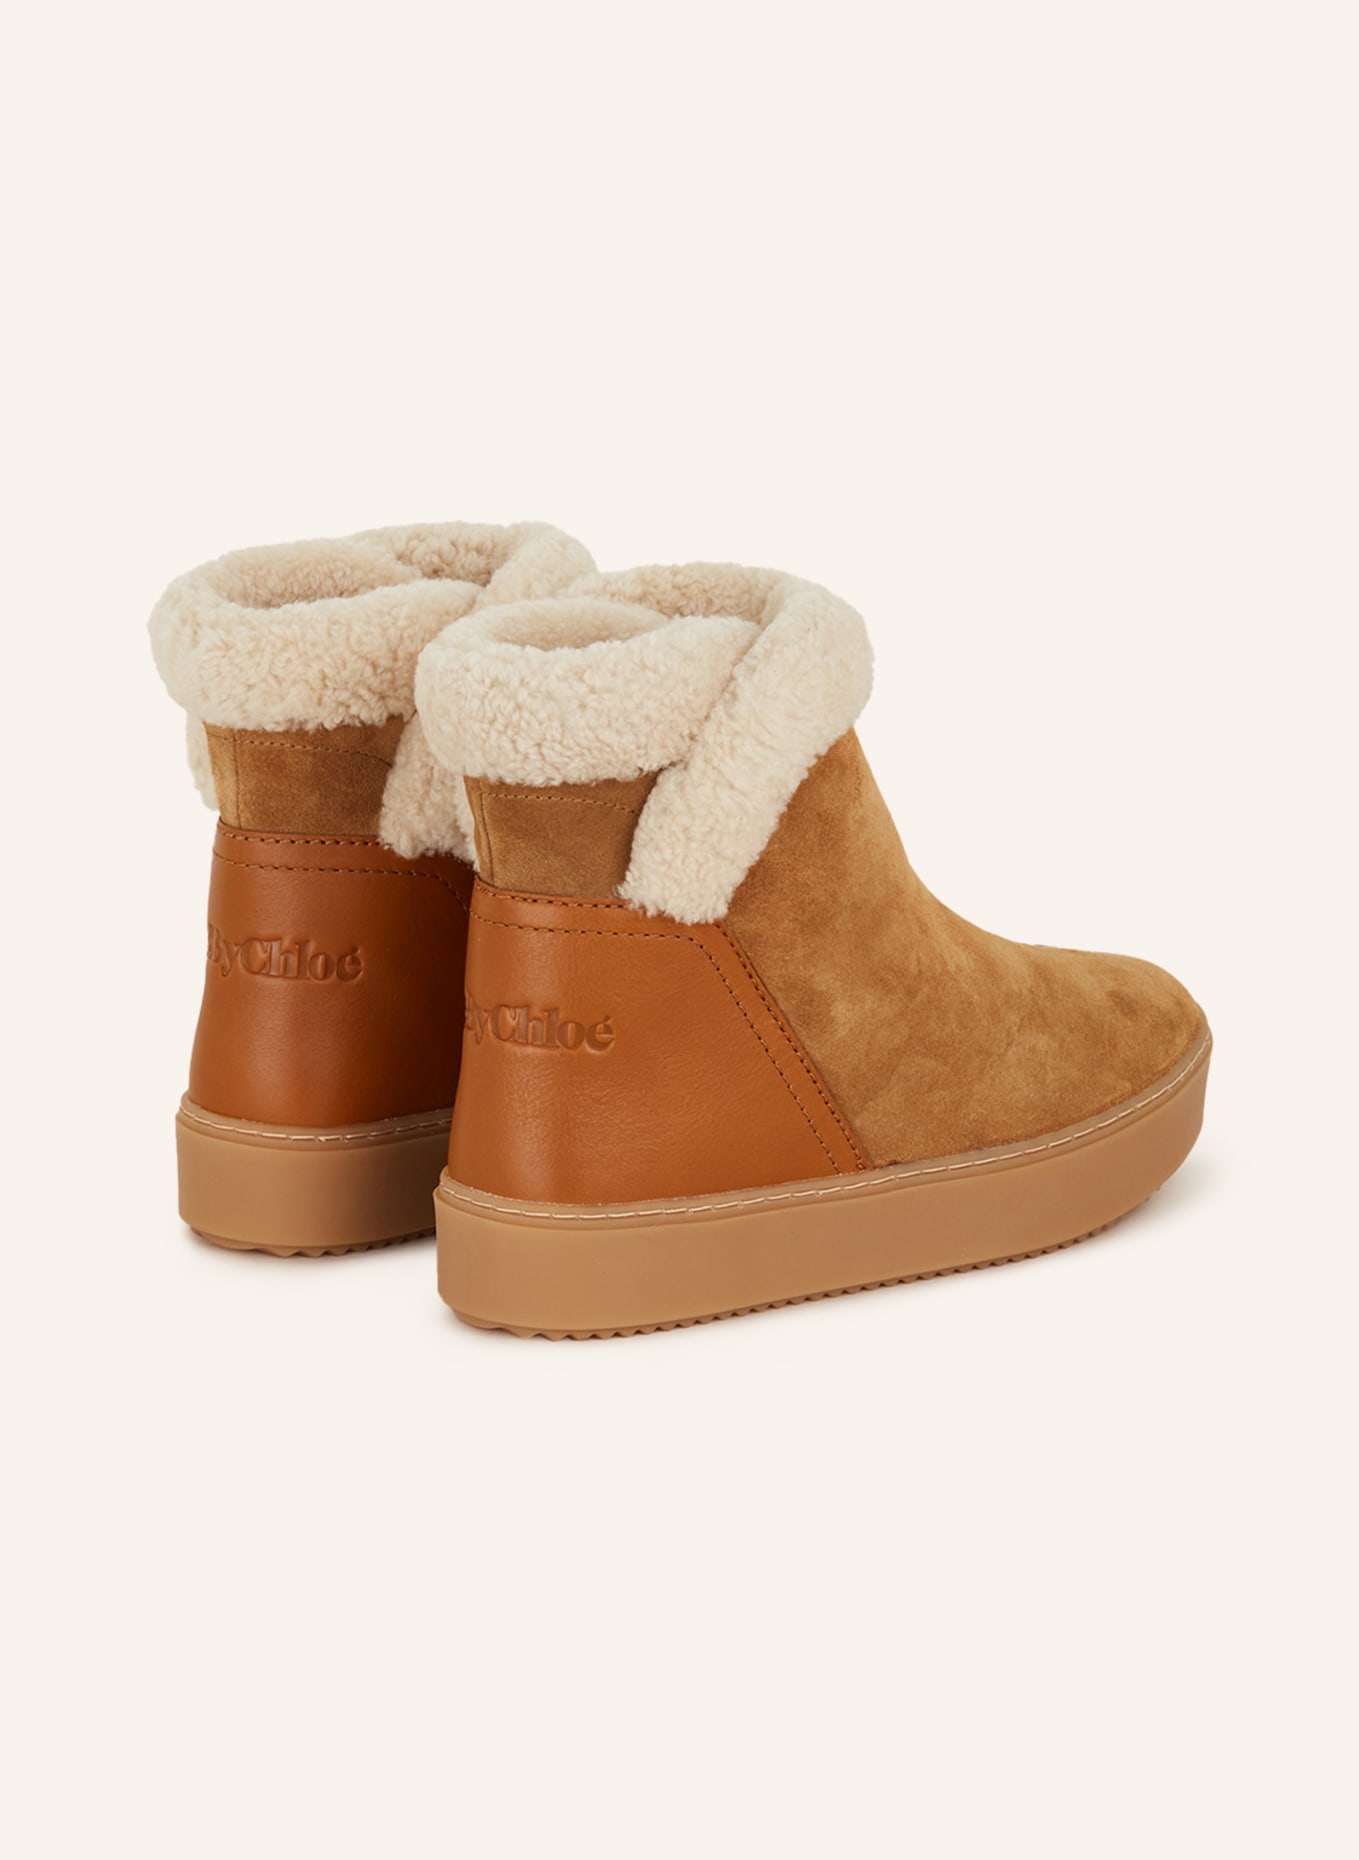 SEE BY CHLOÉ Boots JULIET, Farbe: 506/533/123 Sand (Bild 2)